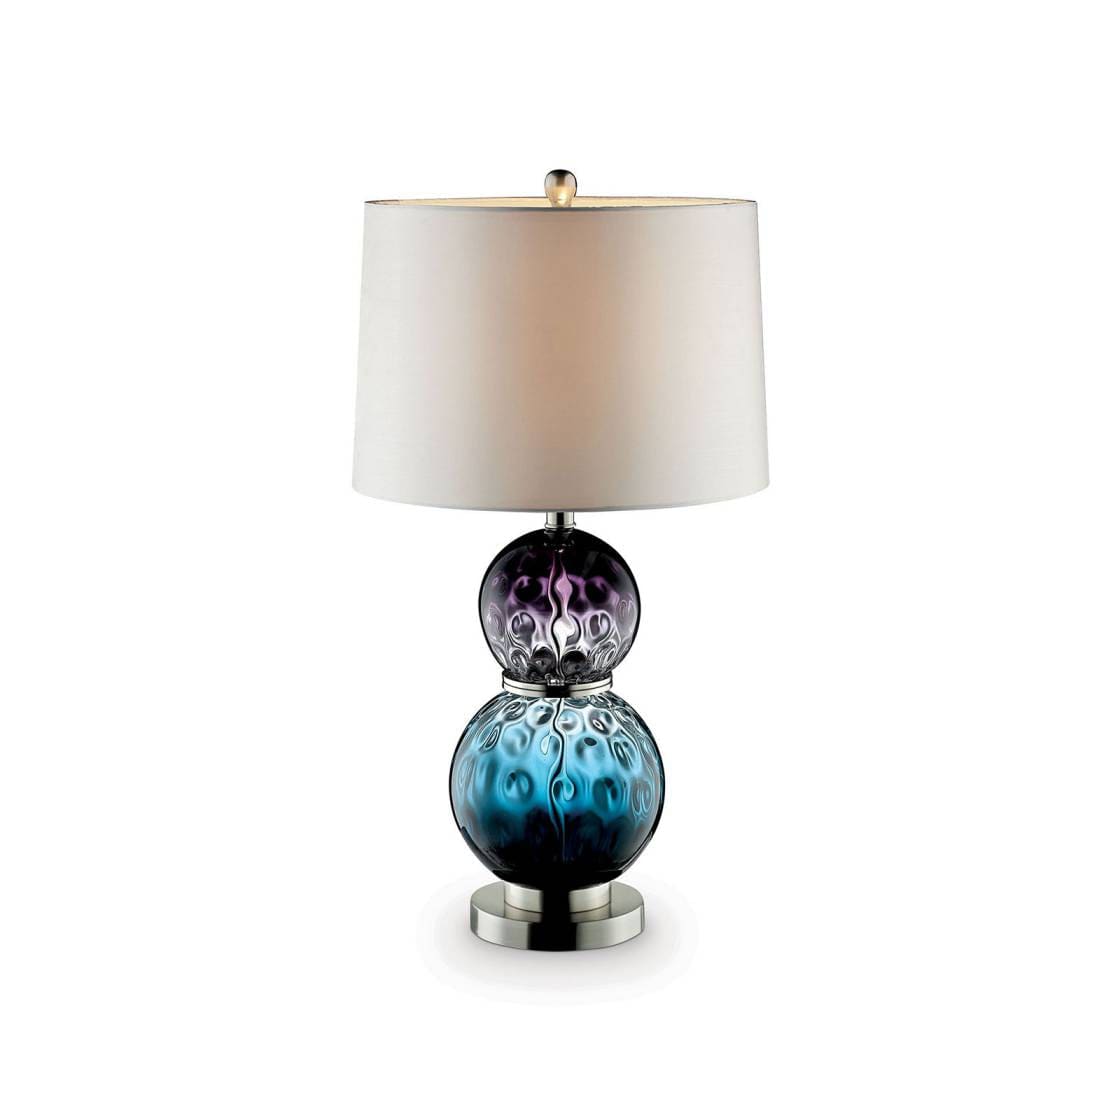 Benzara Table Lamp With Stacked Ball Base And Round Tier Support, Blue And Purple By Benzara Table Lamps BM209038